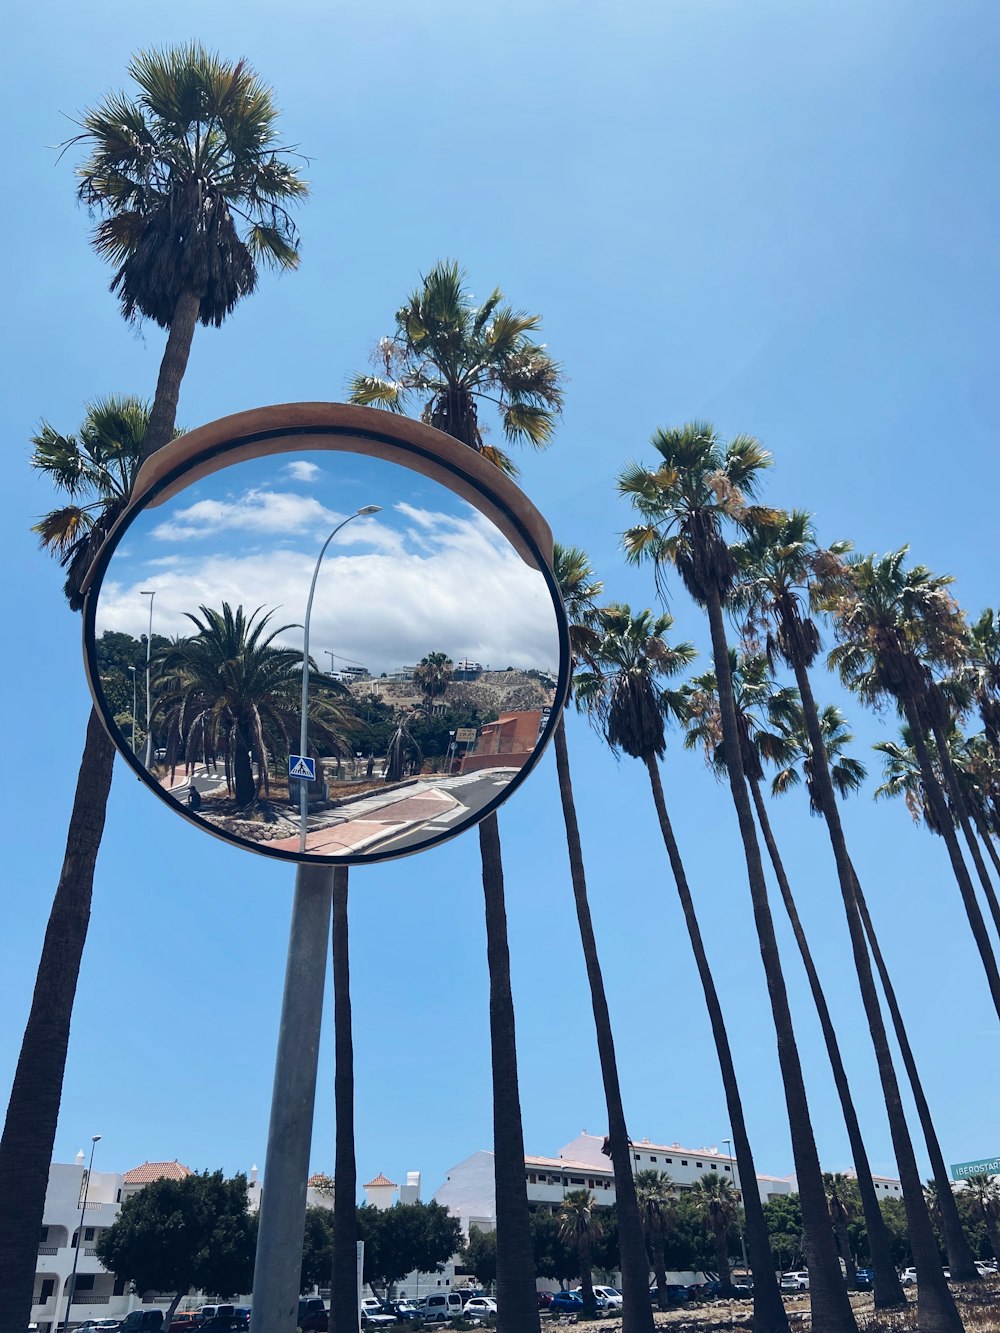 a mirror on a pole with palm trees in the background